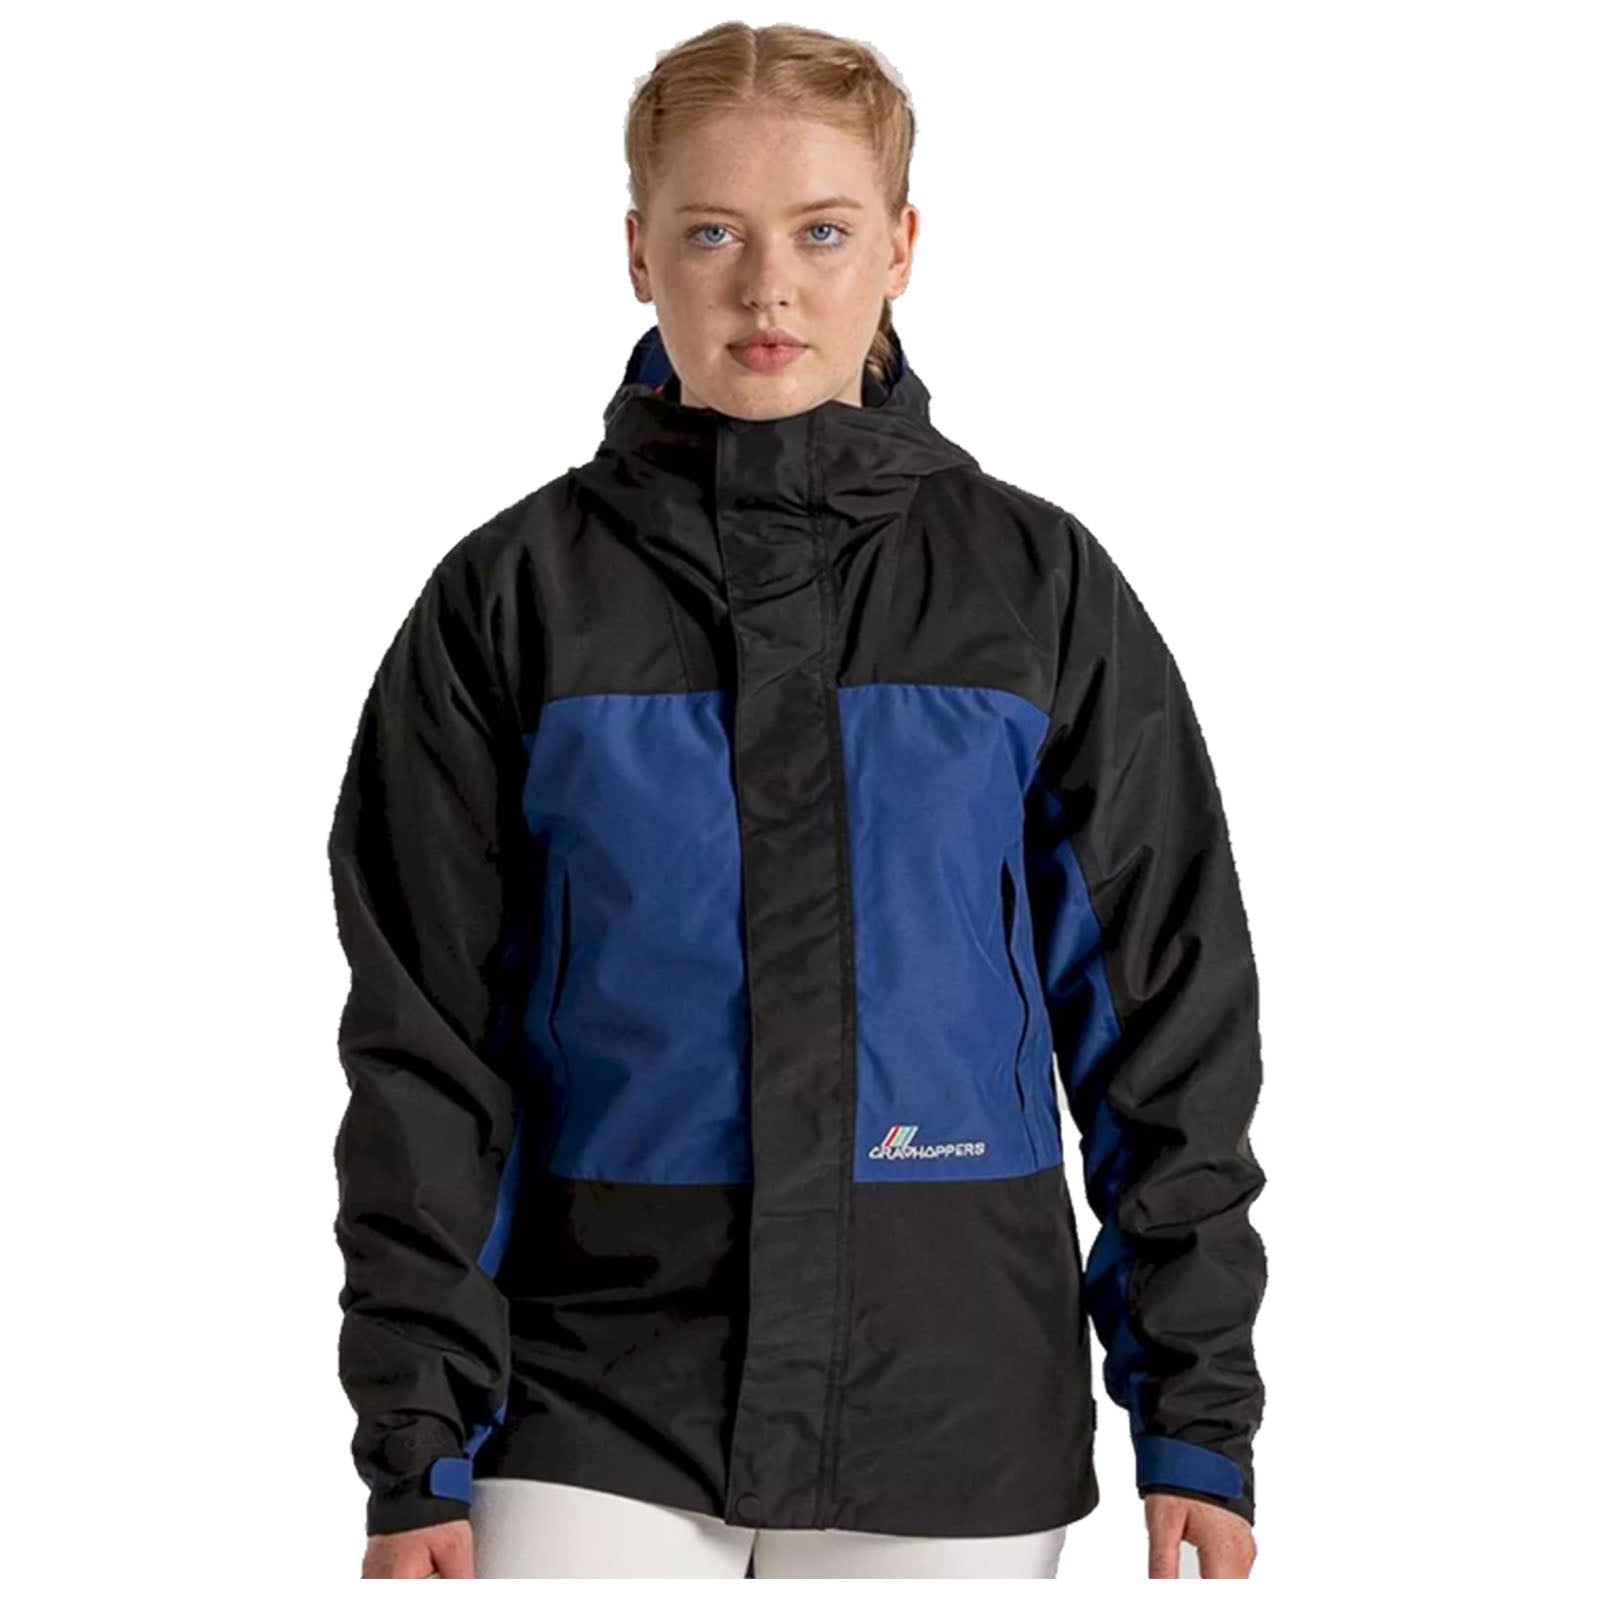 Craghoppers Unisex Dustin Insulated Waterproof Jacket